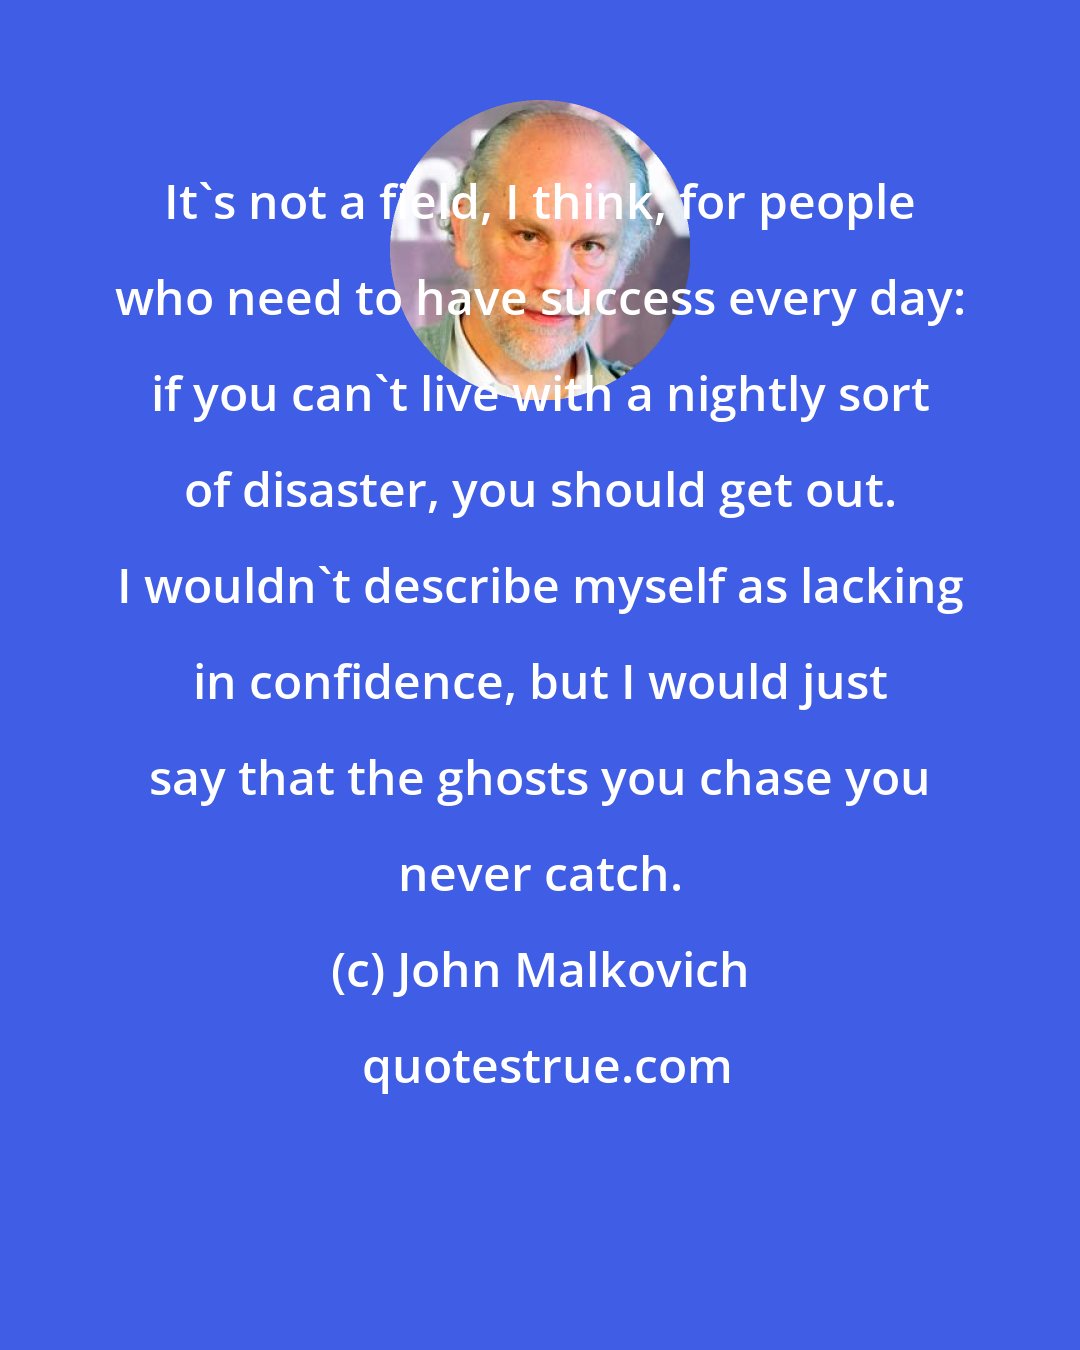 John Malkovich: It's not a field, I think, for people who need to have success every day: if you can't live with a nightly sort of disaster, you should get out. I wouldn't describe myself as lacking in confidence, but I would just say that the ghosts you chase you never catch.